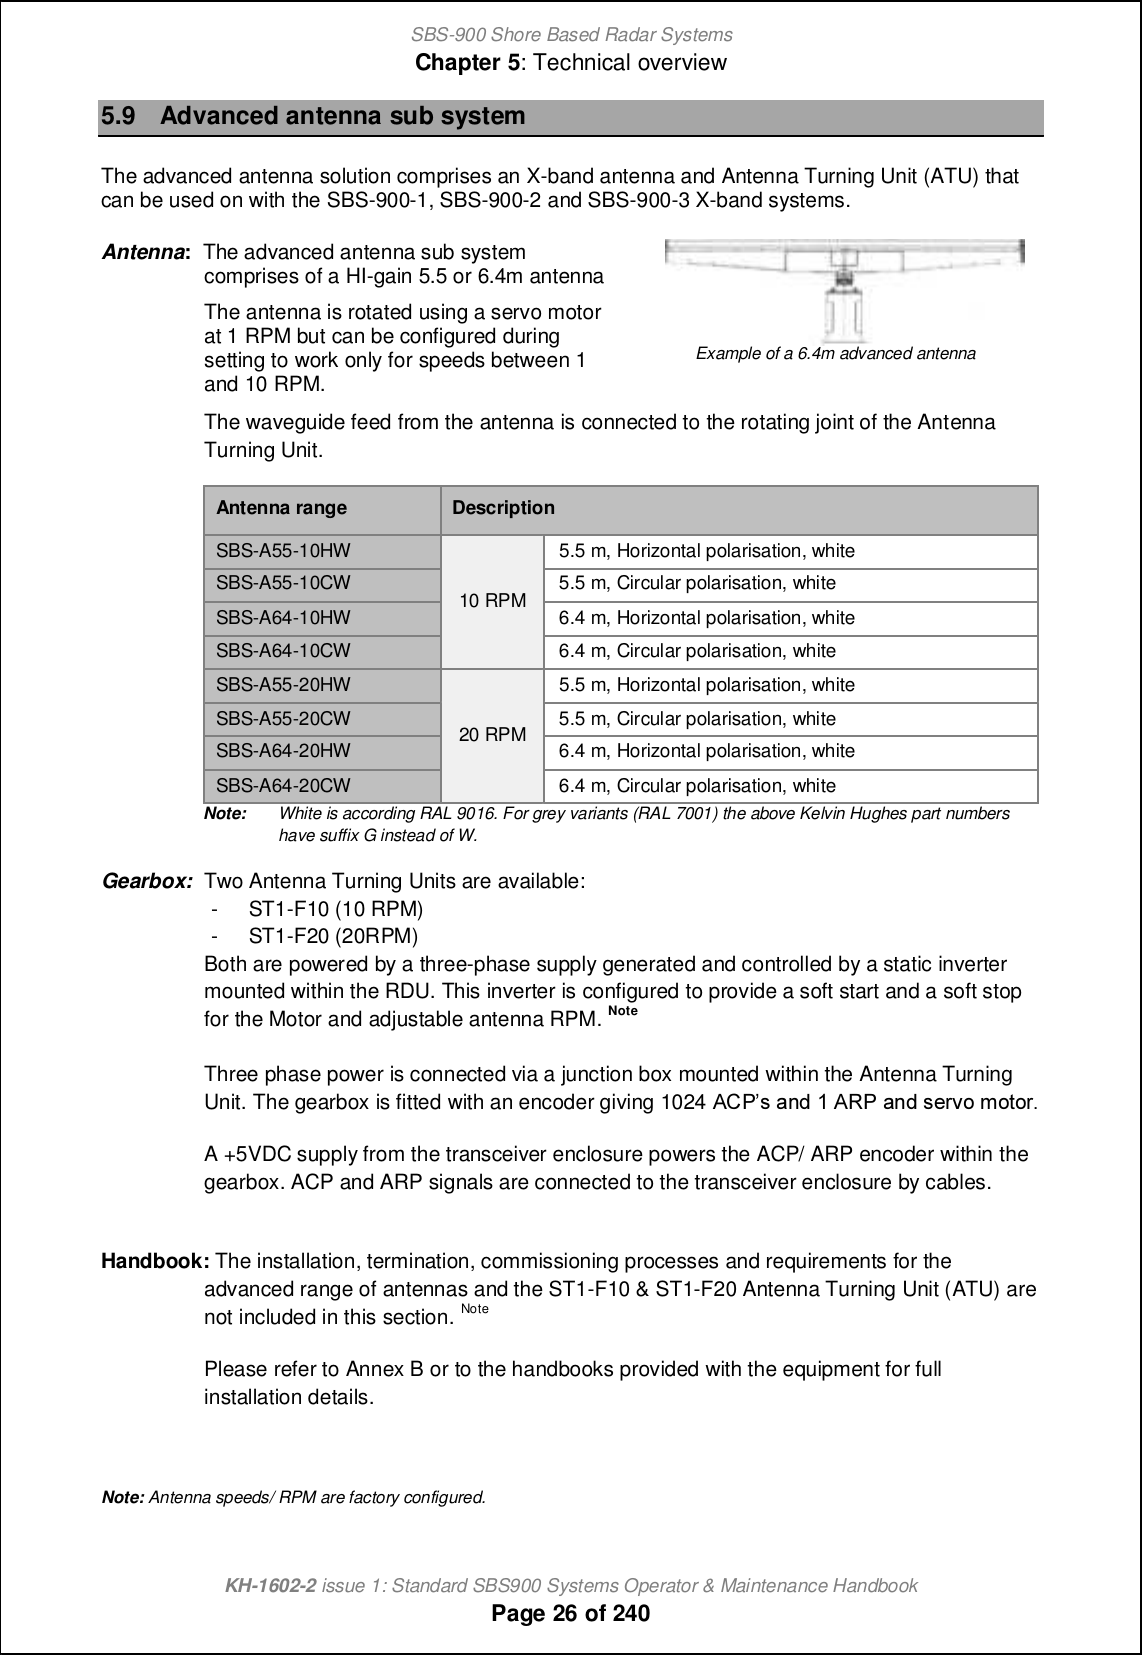 SBS-900 Shore Based Radar SystemsChapter 5: Technical overviewKH-1602-2 issue 1: Standard SBS900 Systems Operator &amp; Maintenance HandbookPage 26 of 2405.9 Advanced antenna sub systemThe advanced antenna solution comprises an X-band antenna and Antenna Turning Unit (ATU) thatcan be used on with the SBS-900-1, SBS-900-2 and SBS-900-3 X-band systems.Antenna:The advanced antenna sub systemcomprises of a HI-gain 5.5 or 6.4m antennaThe antenna is rotated using a servo motorat 1 RPM but can be configured duringsetting to work only for speeds between 1and 10 RPM.Example of a 6.4m advanced antennaThe waveguide feed from the antenna is connected to the rotating joint of the AntennaTurning Unit.Antenna range DescriptionSBS-A55-10HW10 RPM5.5 m, Horizontal polarisation, whiteSBS-A55-10CW 5.5 m, Circular polarisation, whiteSBS-A64-10HW 6.4 m, Horizontal polarisation, whiteSBS-A64-10CW 6.4 m, Circular polarisation, whiteSBS-A55-20HW20 RPM5.5 m, Horizontal polarisation, whiteSBS-A55-20CW 5.5 m, Circular polarisation, whiteSBS-A64-20HW 6.4 m, Horizontal polarisation, whiteSBS-A64-20CW 6.4 m, Circular polarisation, whiteNote: White is according RAL 9016. For grey variants (RAL 7001) the above Kelvin Hughes part numbershave suffix G instead of W.Gearbox: Two Antenna Turning Units are available:- ST1-F10 (10 RPM)- ST1-F20 (20RPM)Both are powered by a three-phase supply generated and controlled by a static invertermounted within the RDU. This inverter is configured to provide a soft start and a soft stopfor the Motor and adjustable antenna RPM. NoteThree phase power is connected via a junction box mounted within the Antenna TurningUnit. The gearbox is fitted with an encoder giving 1024 @BOm [h^ 0 @QO [h^ m_lpi ginil-A +5VDC supply from the transceiver enclosure powers the ACP/ ARP encoder within thegearbox. ACP and ARP signals are connected to the transceiver enclosure by cables.Handbook: The installation, termination, commissioning processes and requirements for theadvanced range of antennas and the ST1-F10 &amp; ST1-F20 Antenna Turning Unit (ATU) arenot included in this section. NotePlease refer to Annex B or to the handbooks provided with the equipment for fullinstallation details.Note: Antenna speeds/ RPM are factory configured.